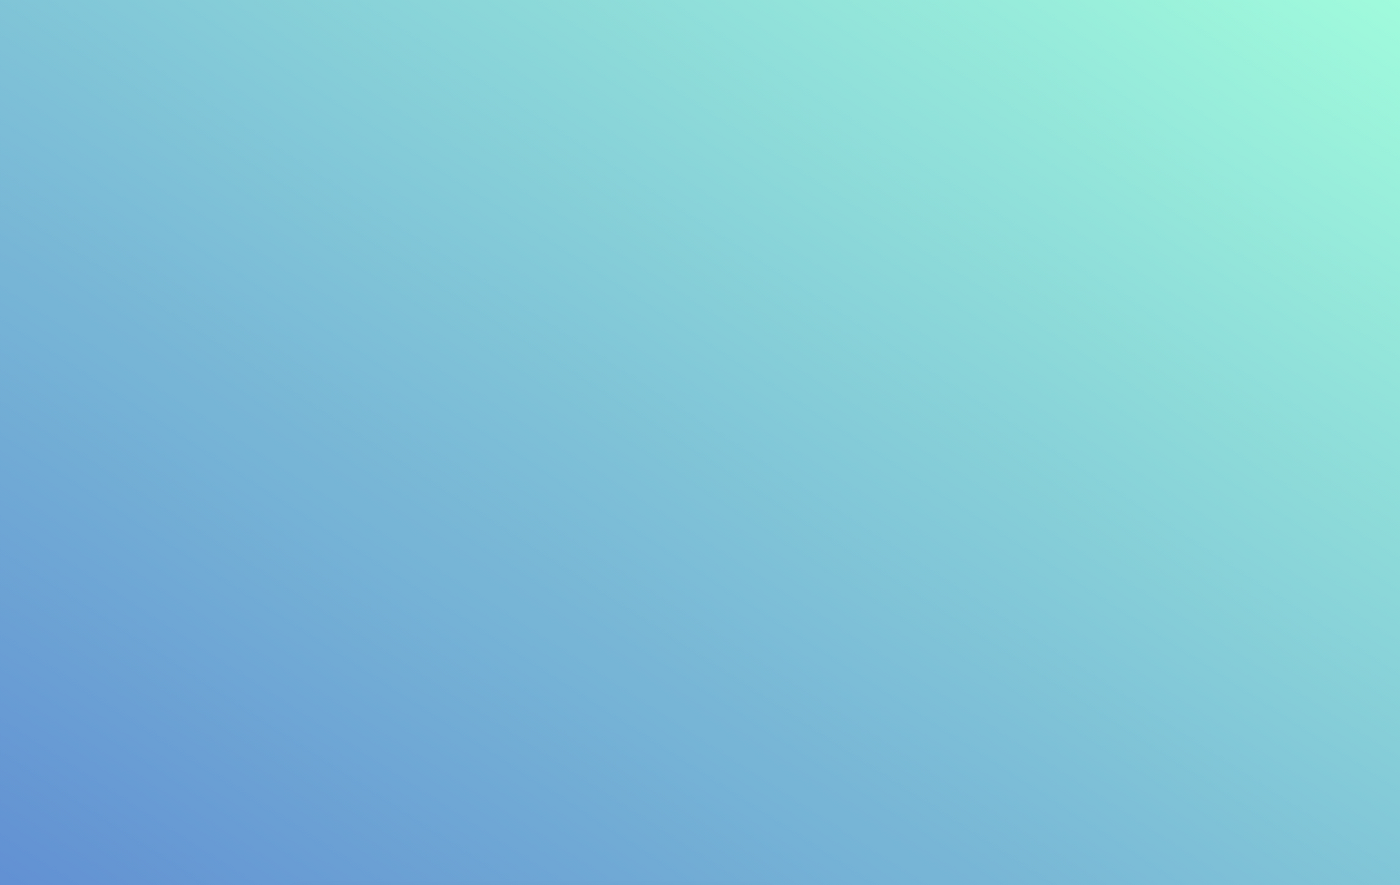 Using CSS gradients for background gradient images, by Kirsten Swanson